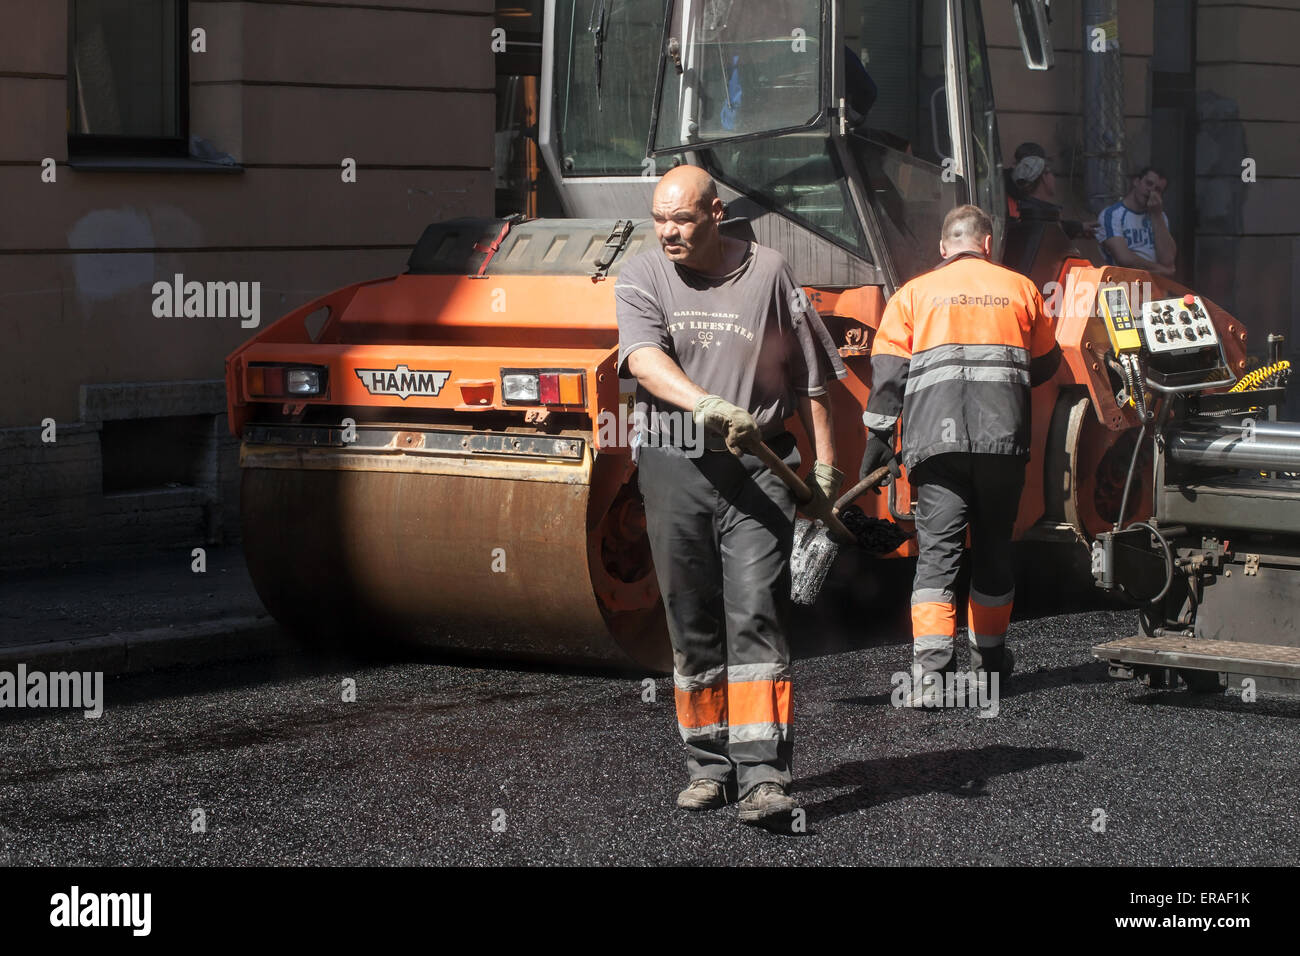 Saint-Petersburg, Russia - May 30, 2015:  men at work, urban road under construction, asphalting in progress with workers, aspha Stock Photo